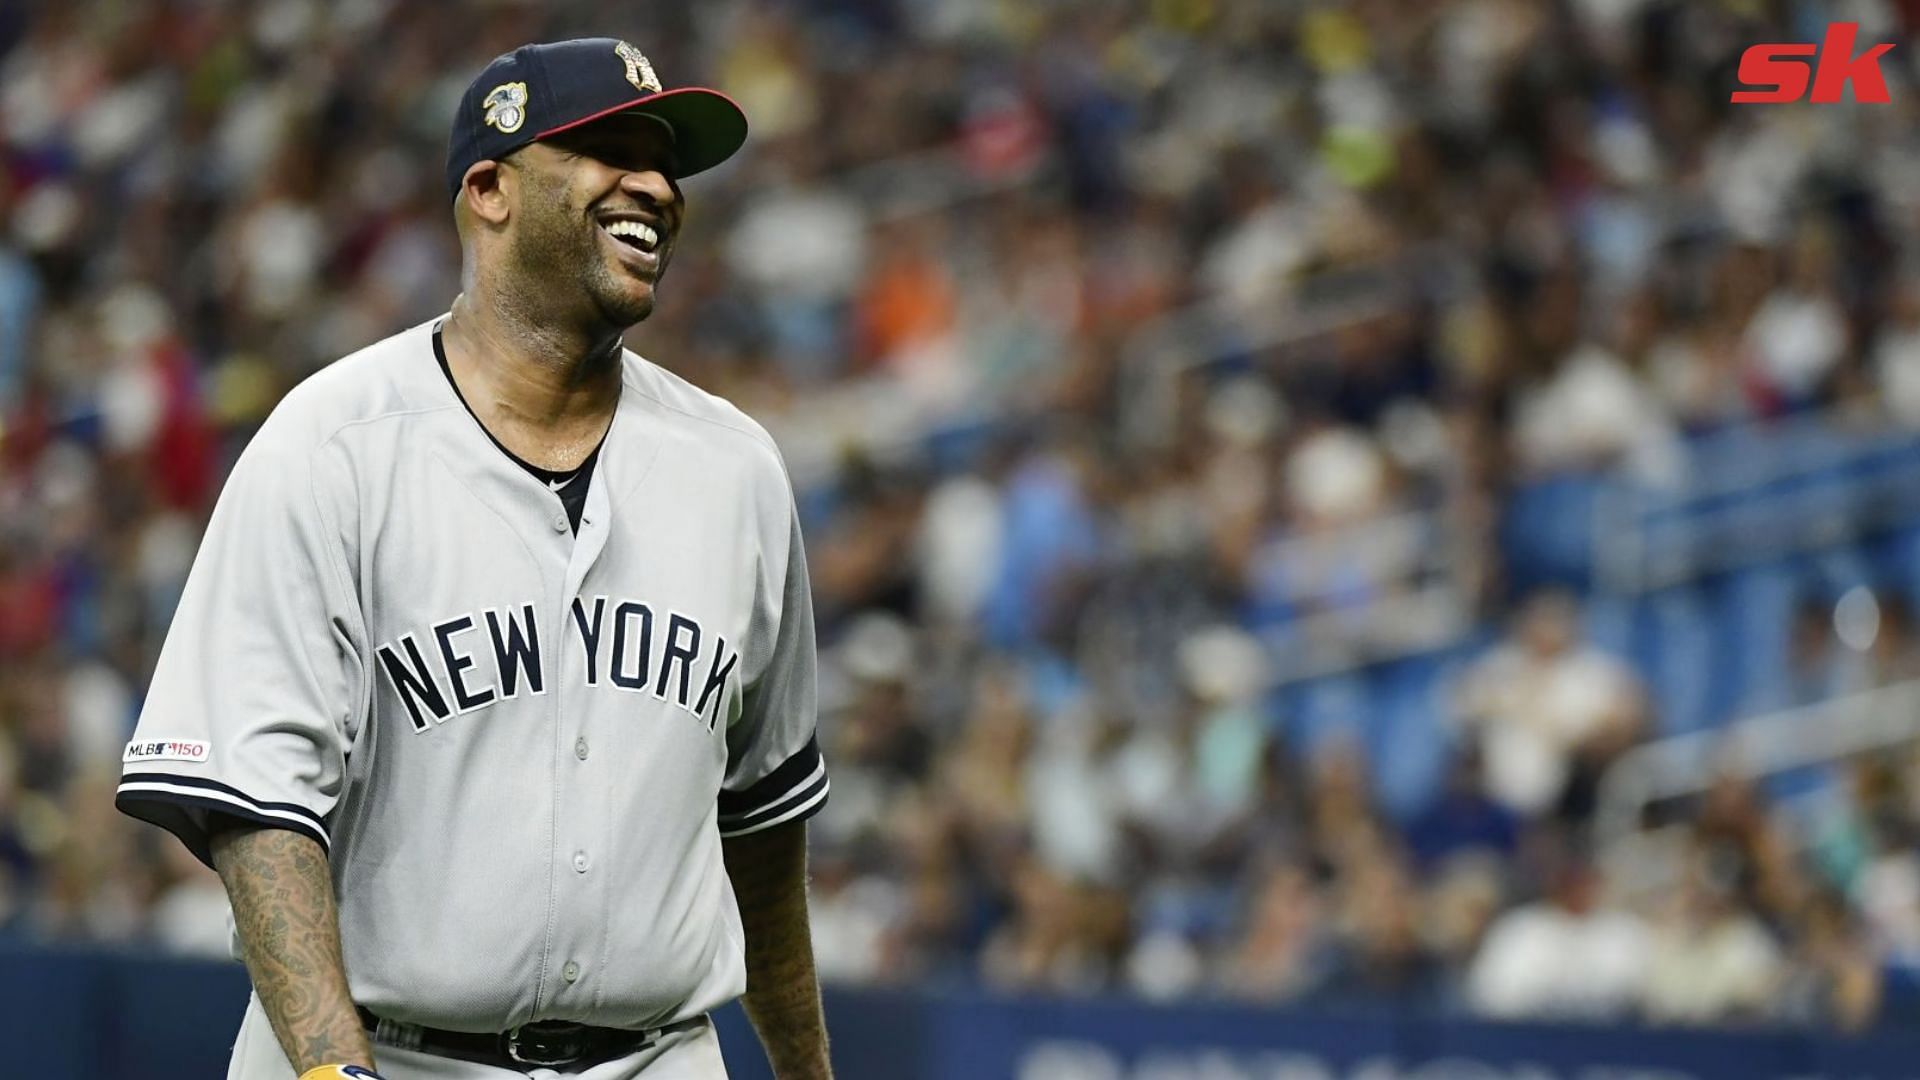 New York Yankees pitcher CC Sabathia intentionally puts on weight